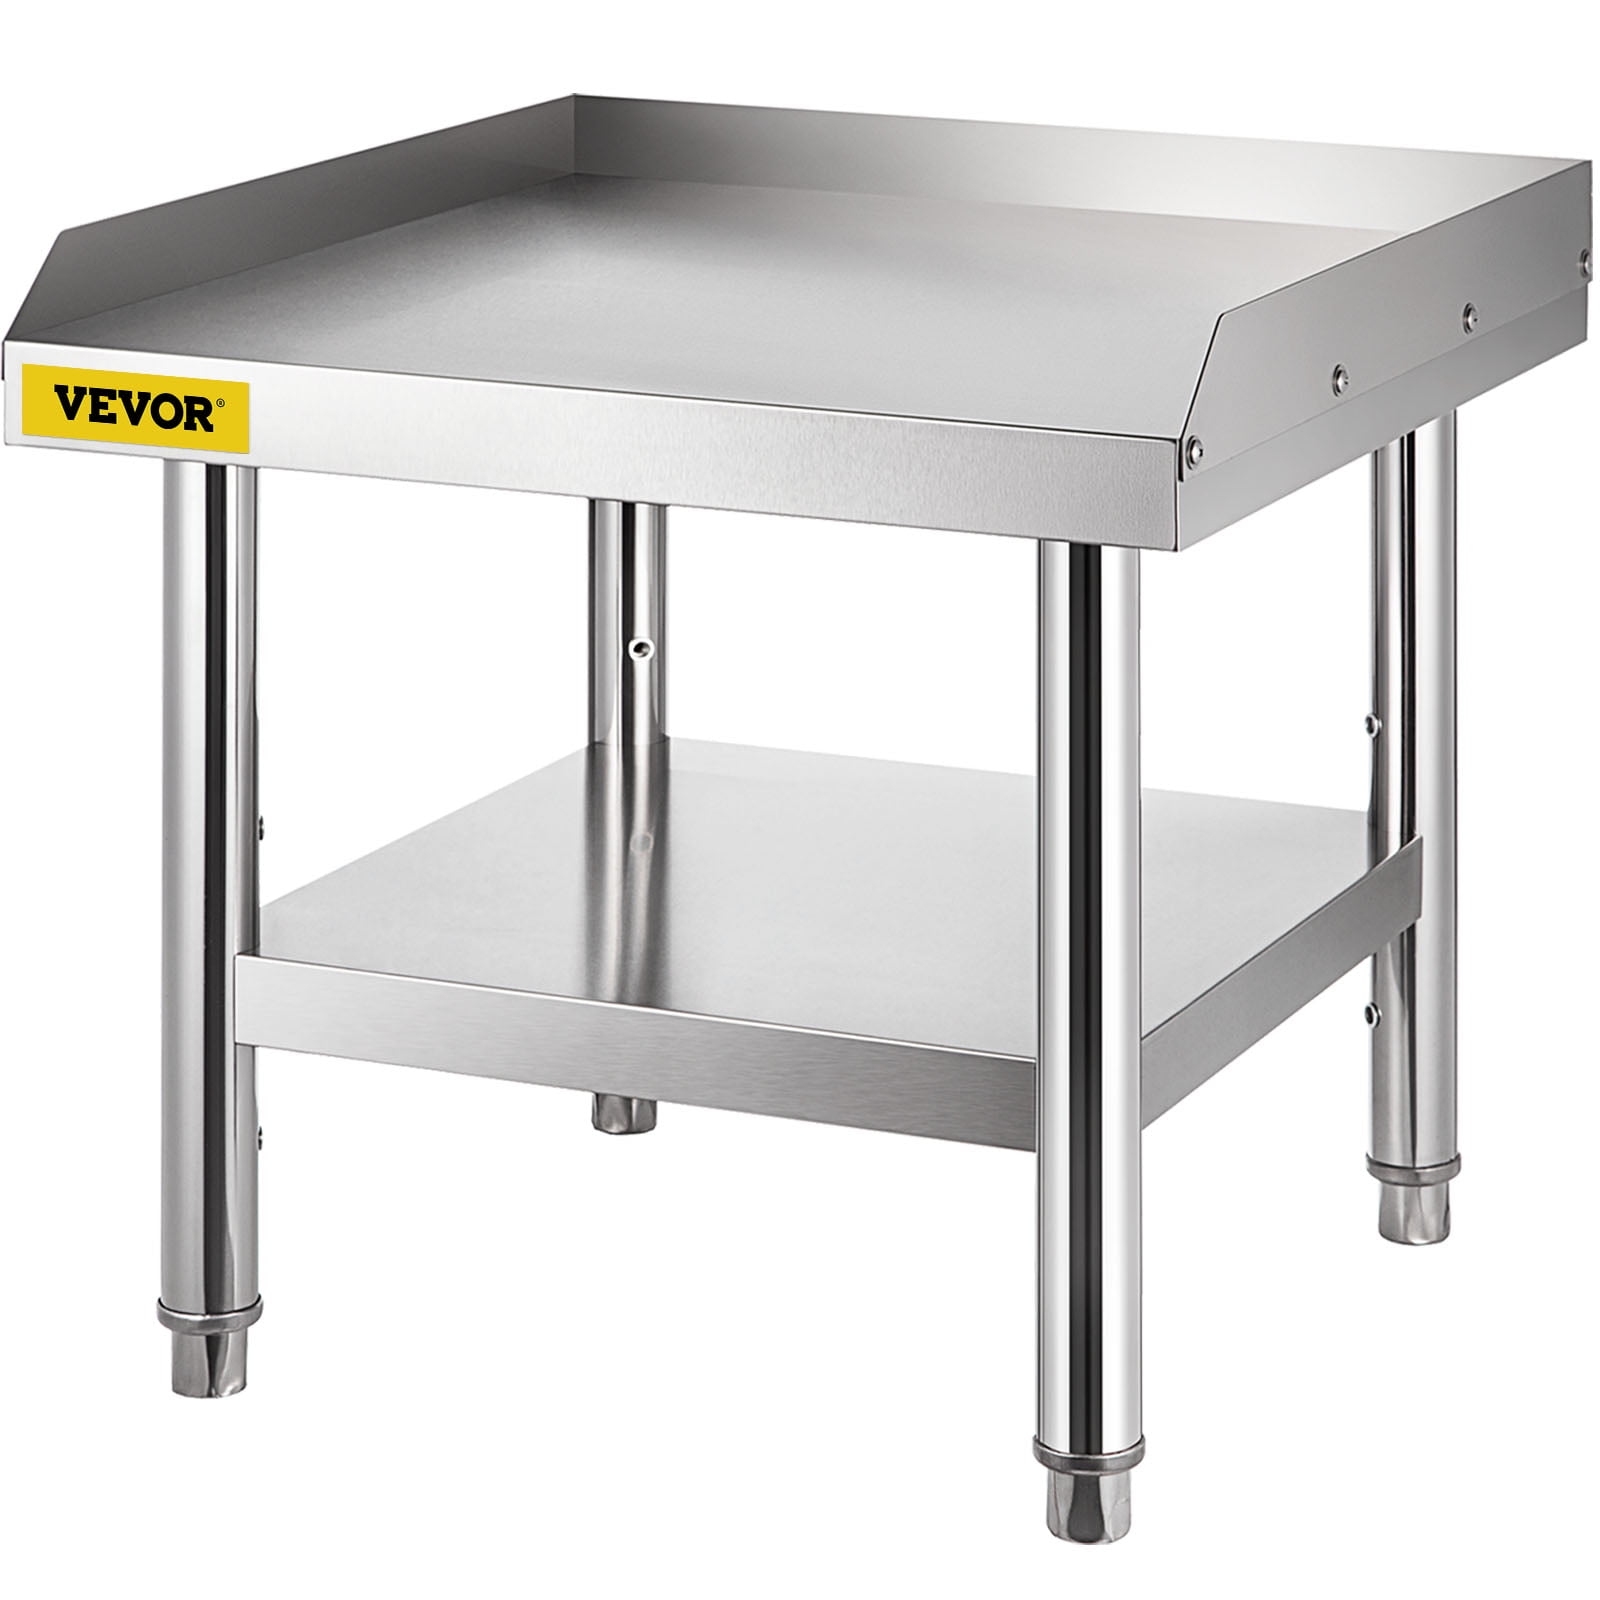 Stainless Steel Commercial Catering Table Work Bench Heavy Duty Adjustable Shelf 